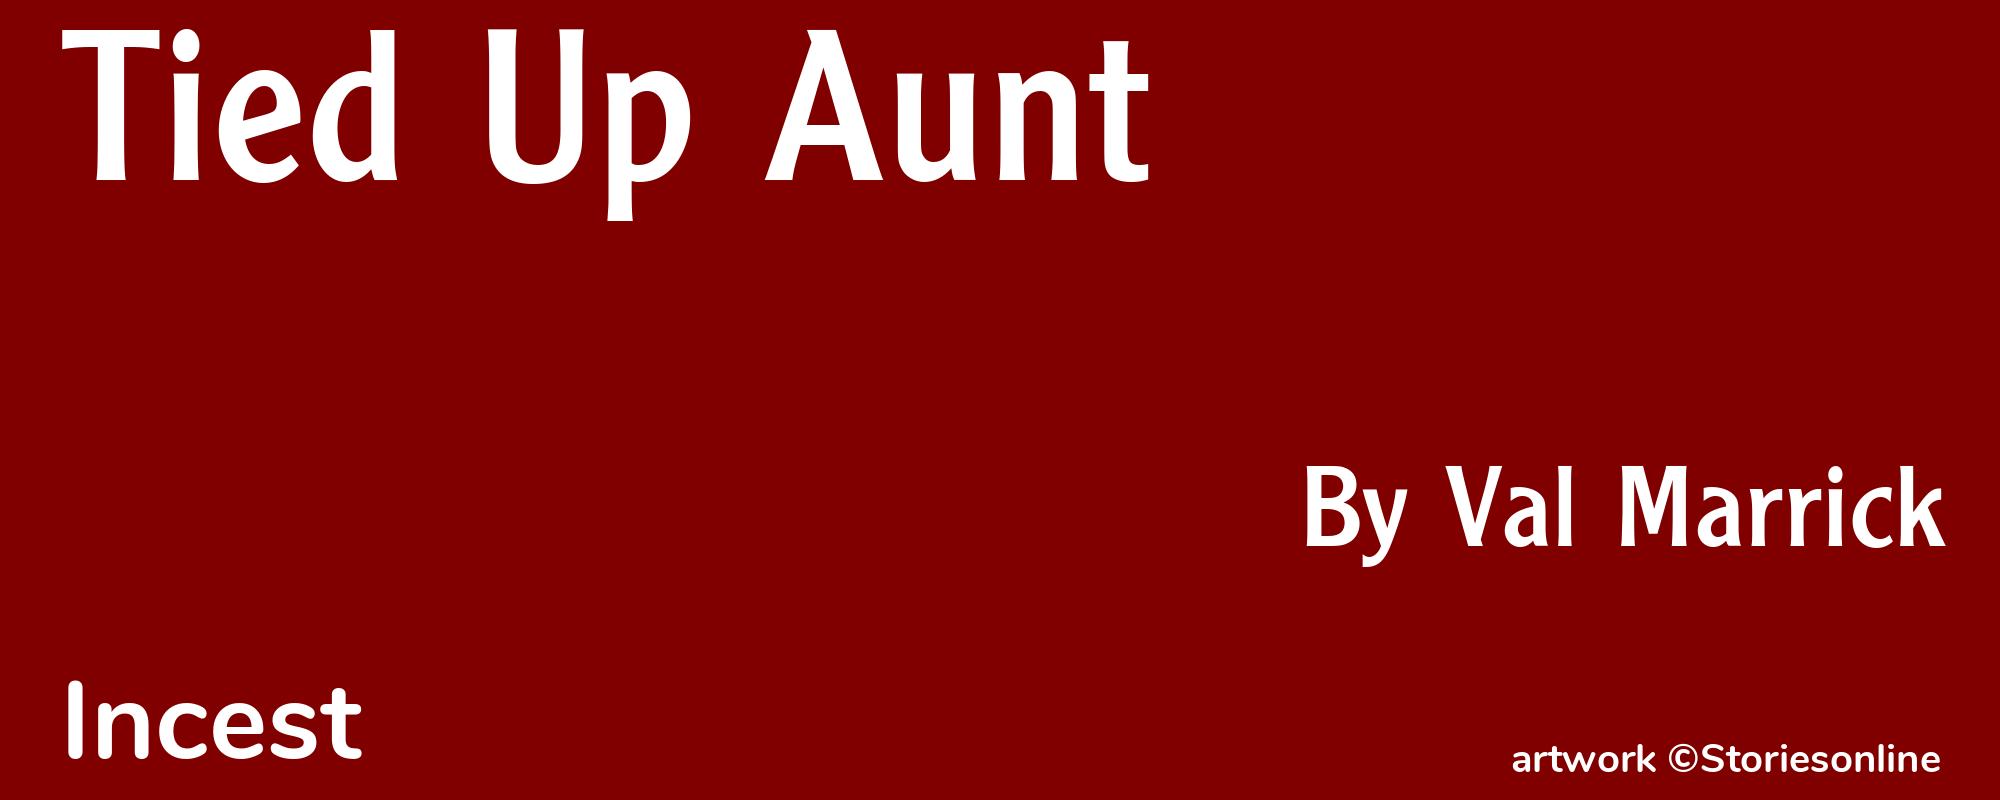 Tied Up Aunt - Cover